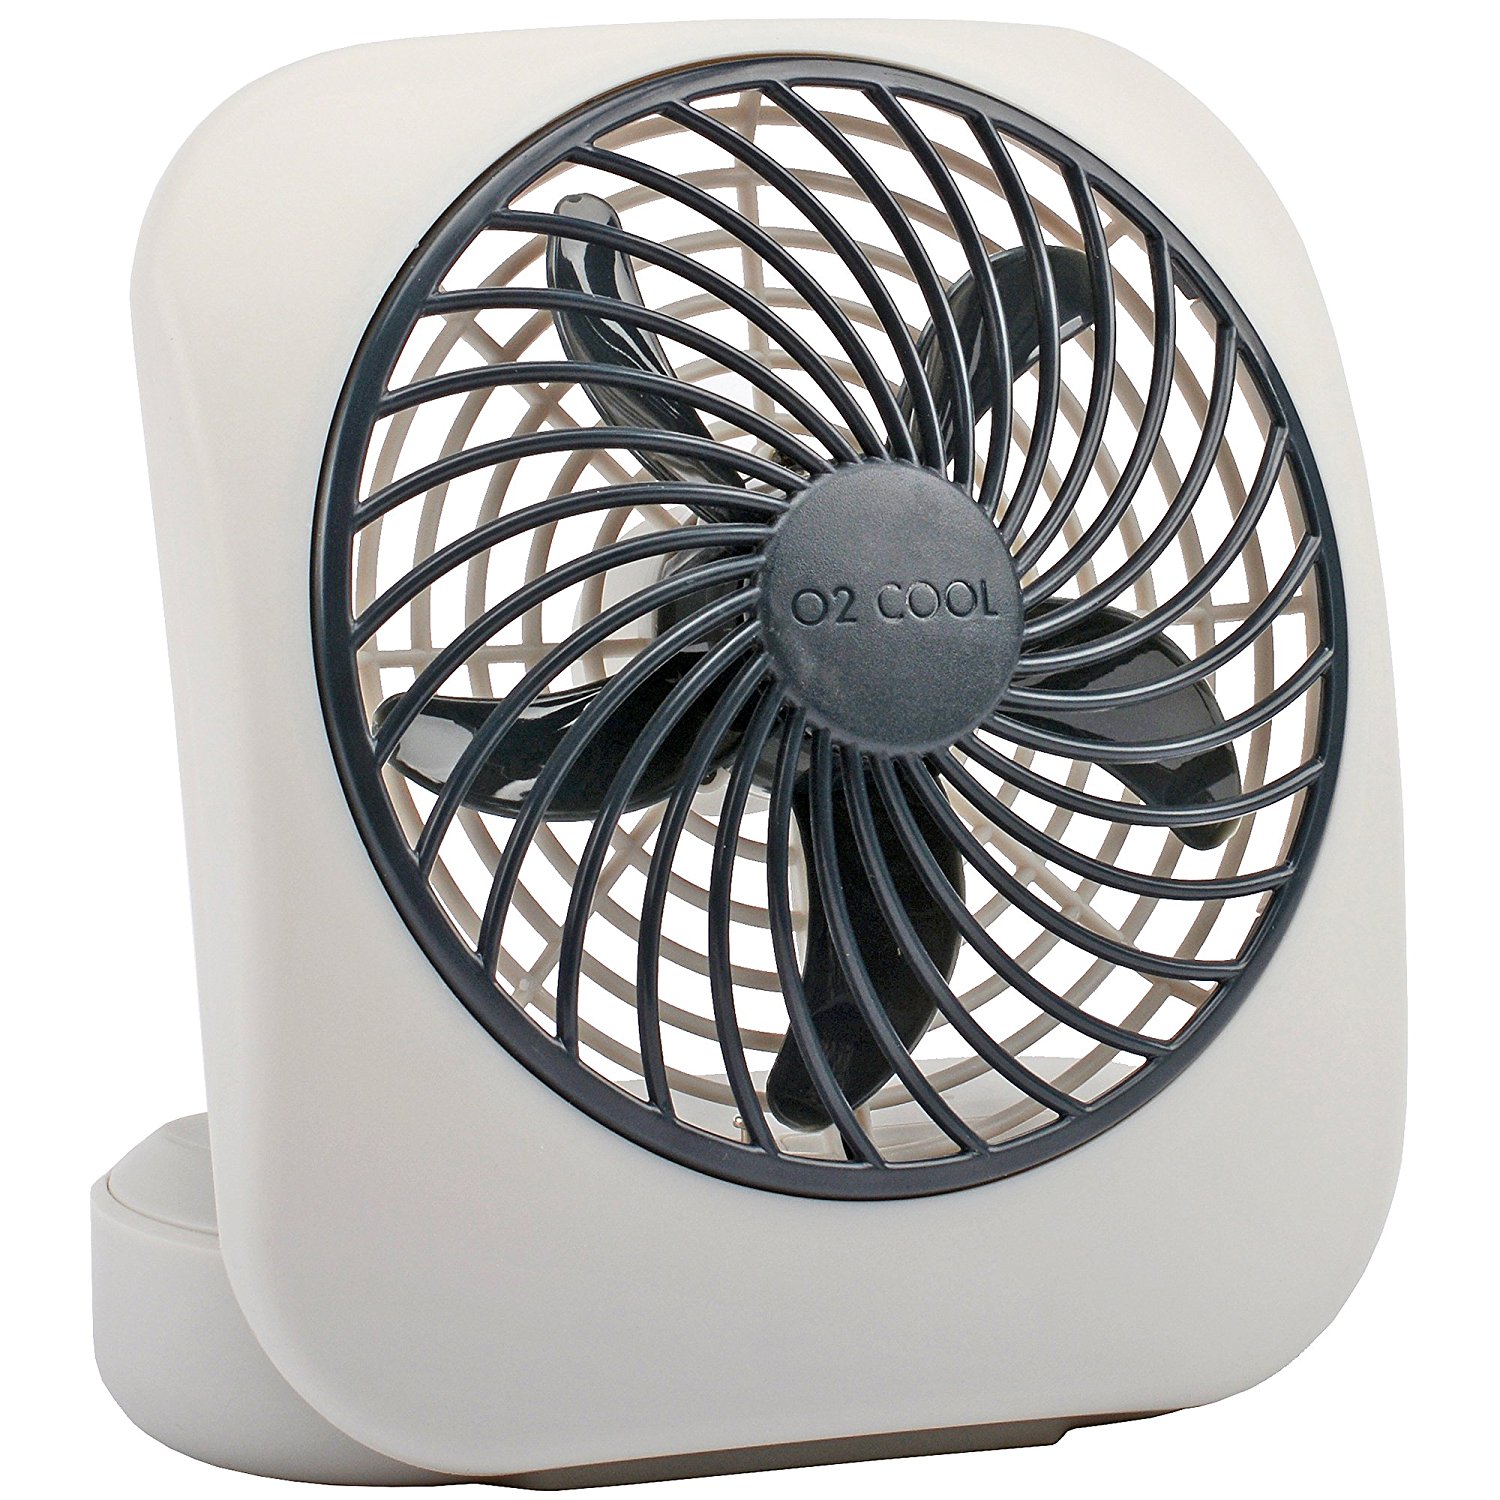 O2COOL 5-Inch Portable Fan – Just $7.99!